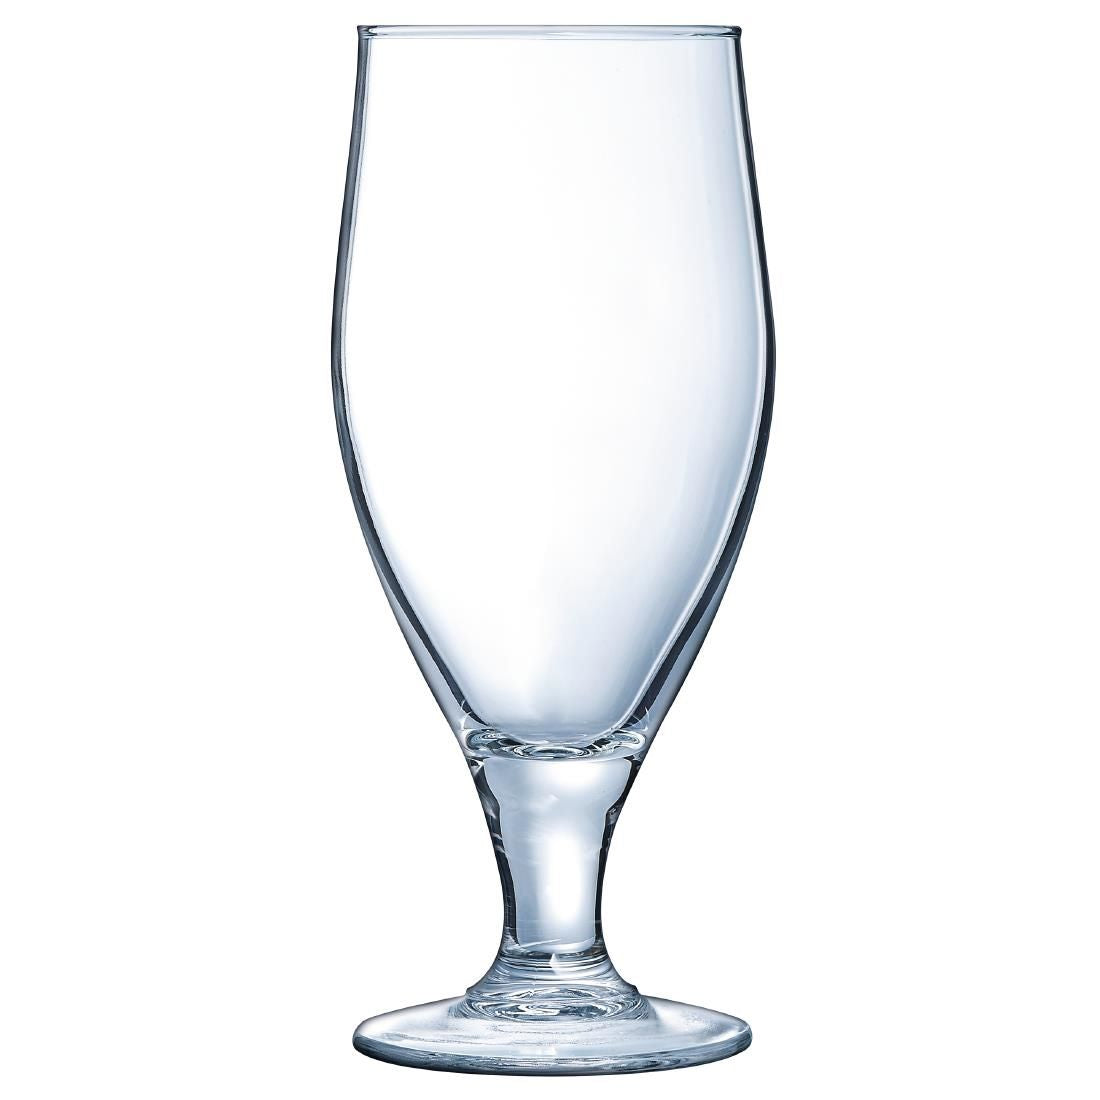 DL198 Arcoroc Cervoise Nucleated Stemmed Beer Glasses 320ml CE Marked at 284ml JD Catering Equipment Solutions Ltd